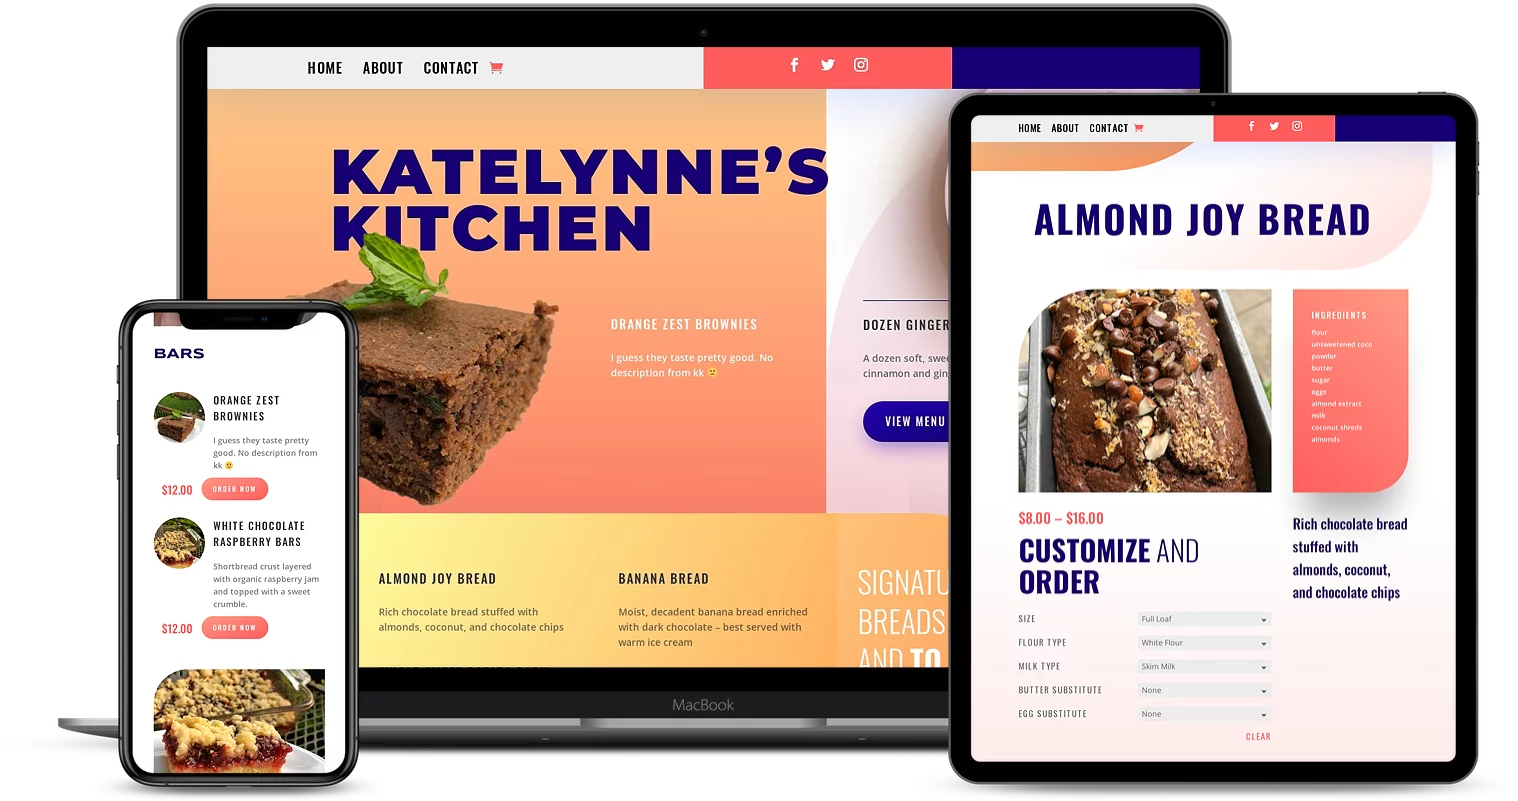 Katelynne’s Kitchen is a Chicago-based homemade treats business. Their website included an online ordering system that allowed full customization of food orders as well as automatic shipping calculations.